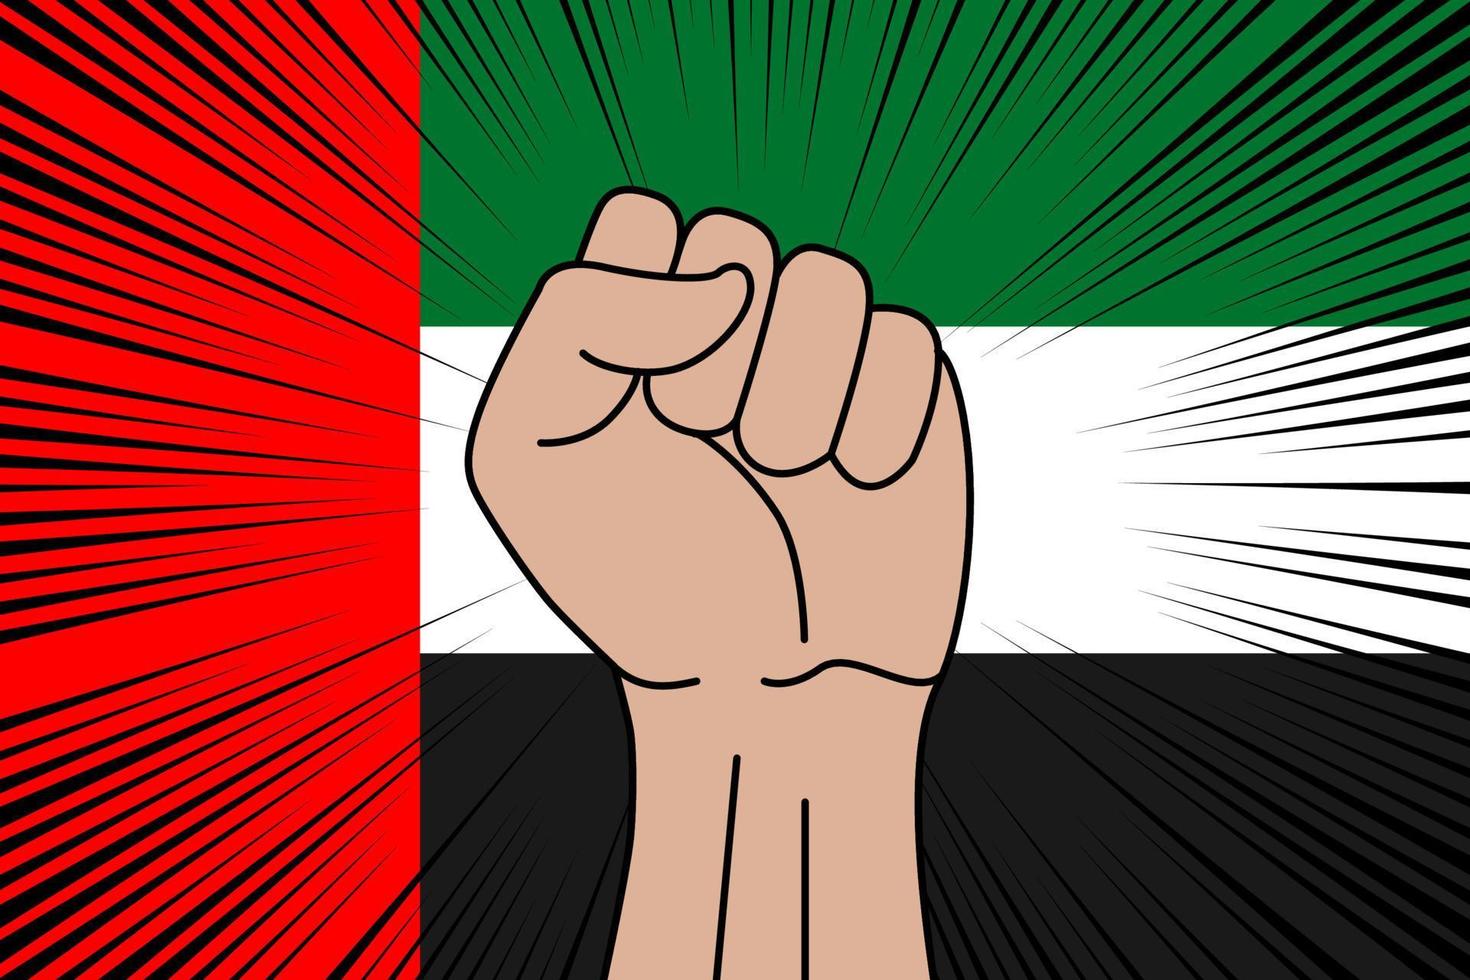 Human fist clenched symbol on flag of United Arab Emirates vector